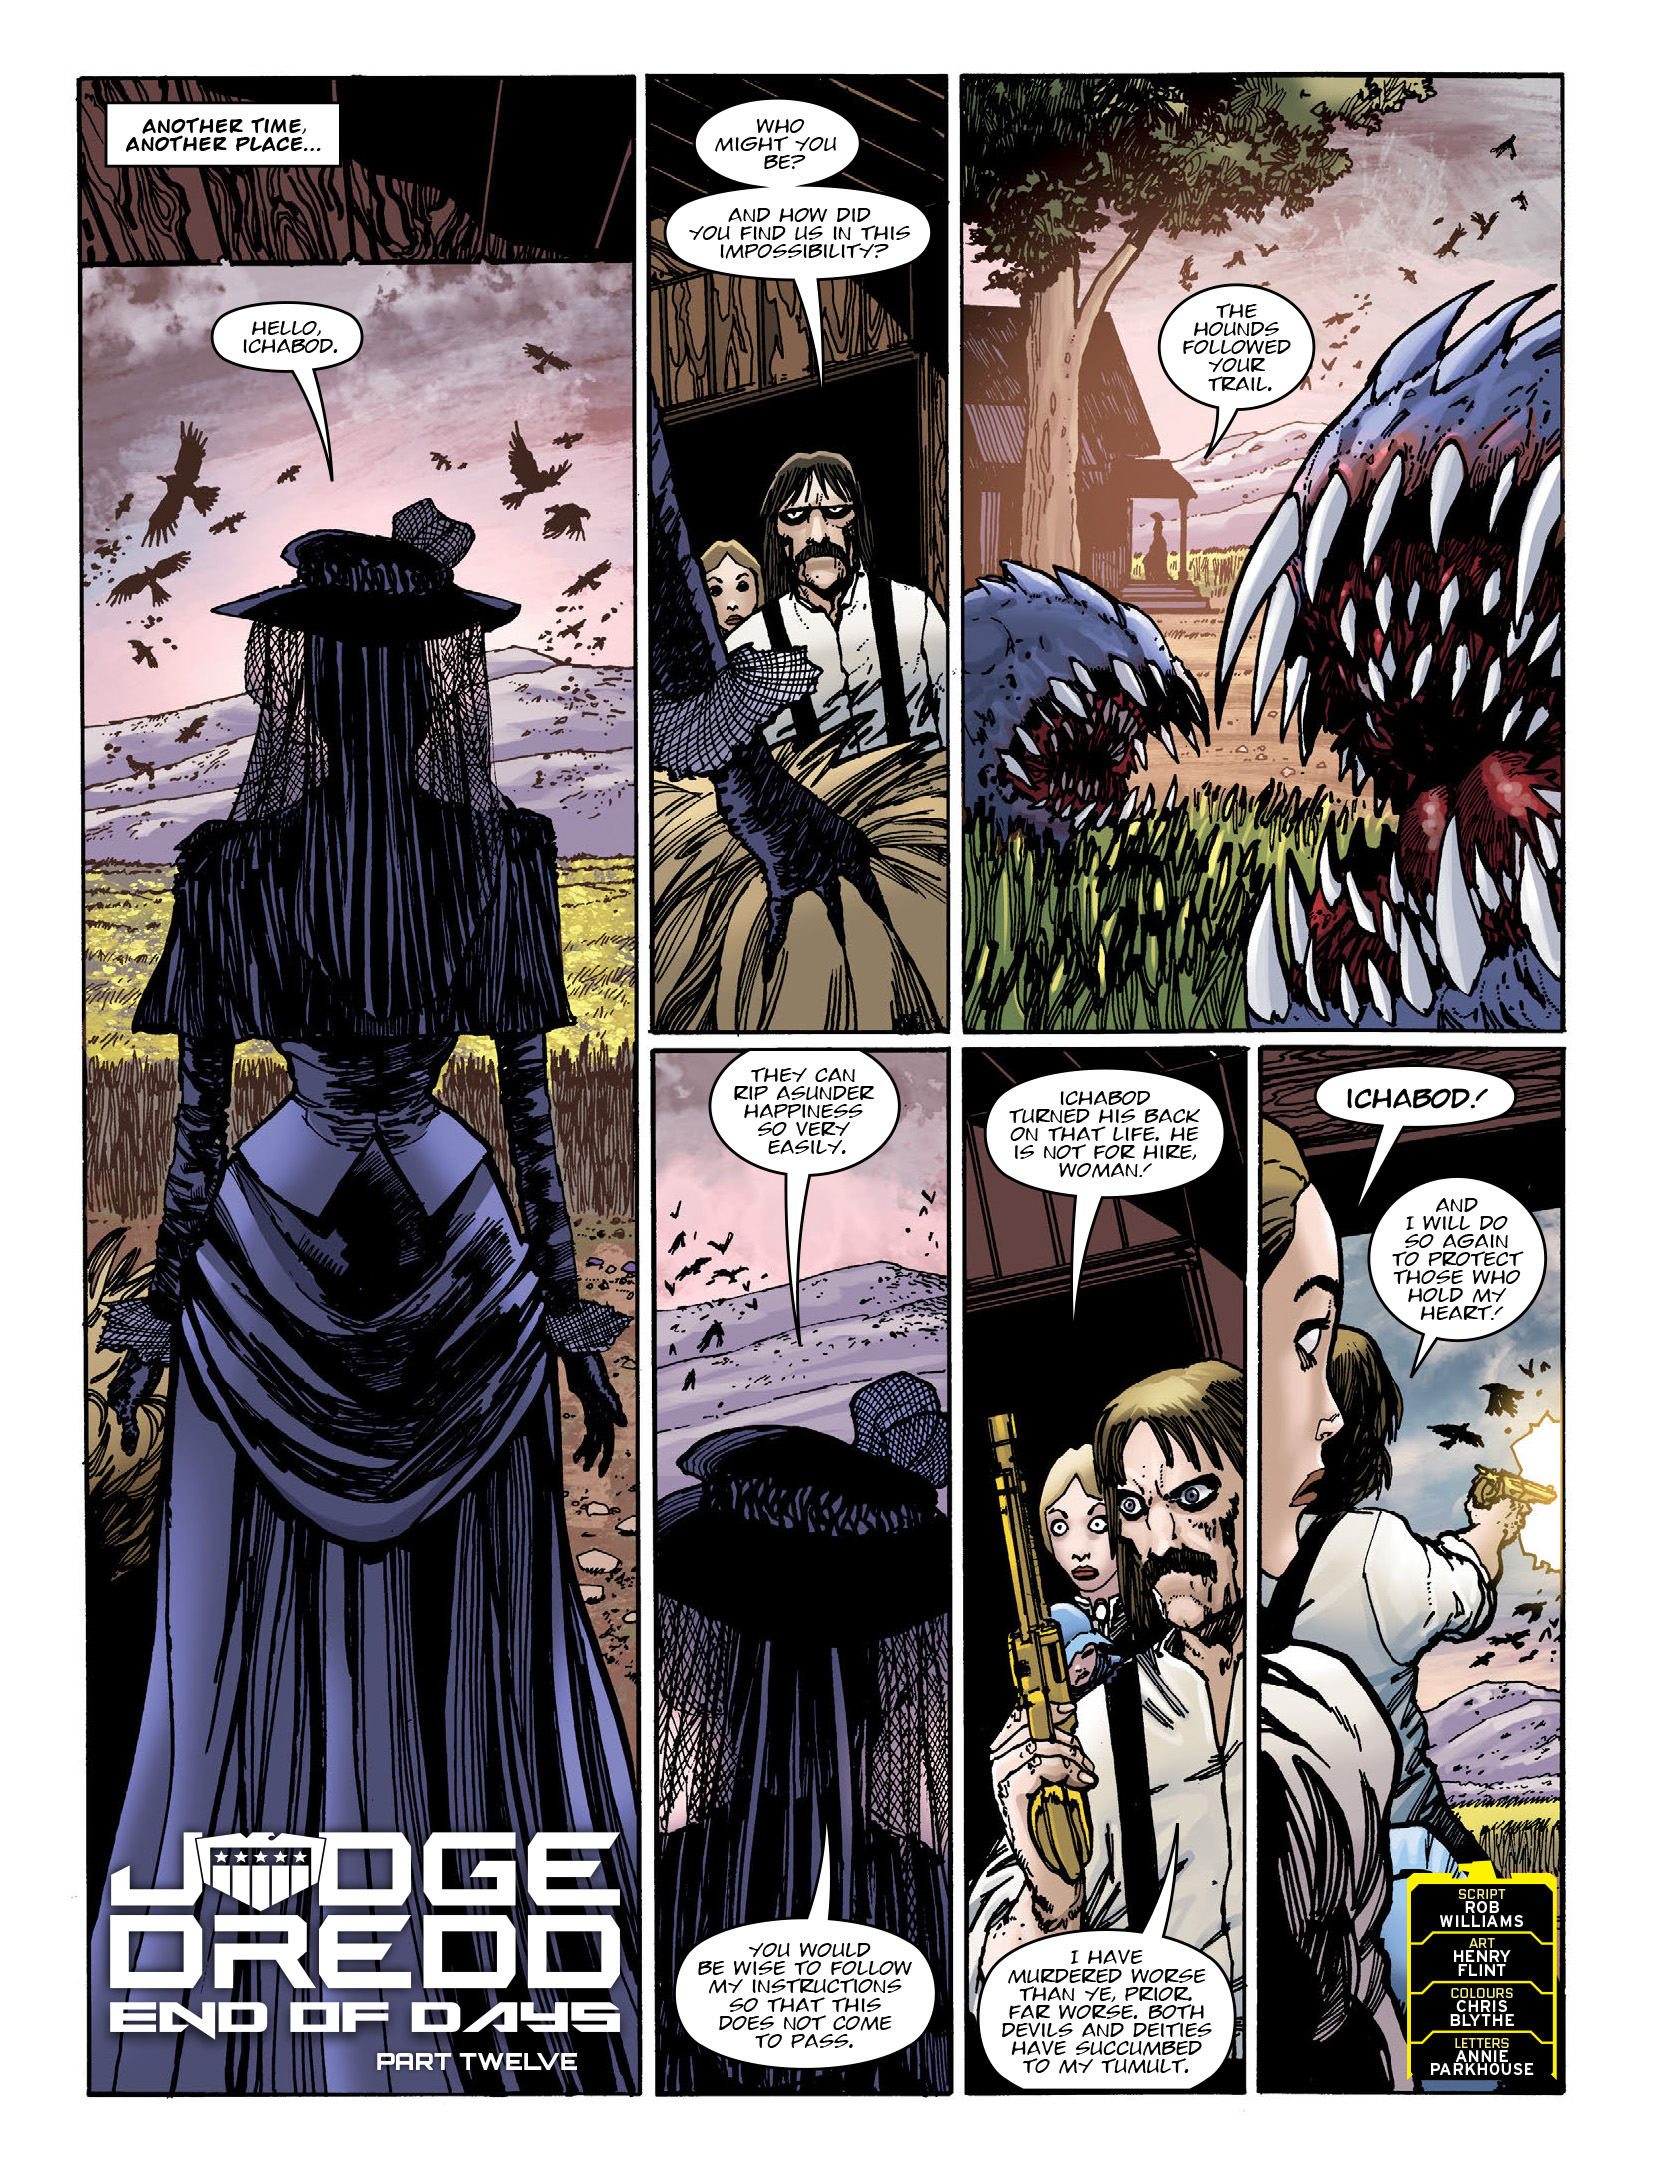 2000 AD: Chapter 2195 - Page 3